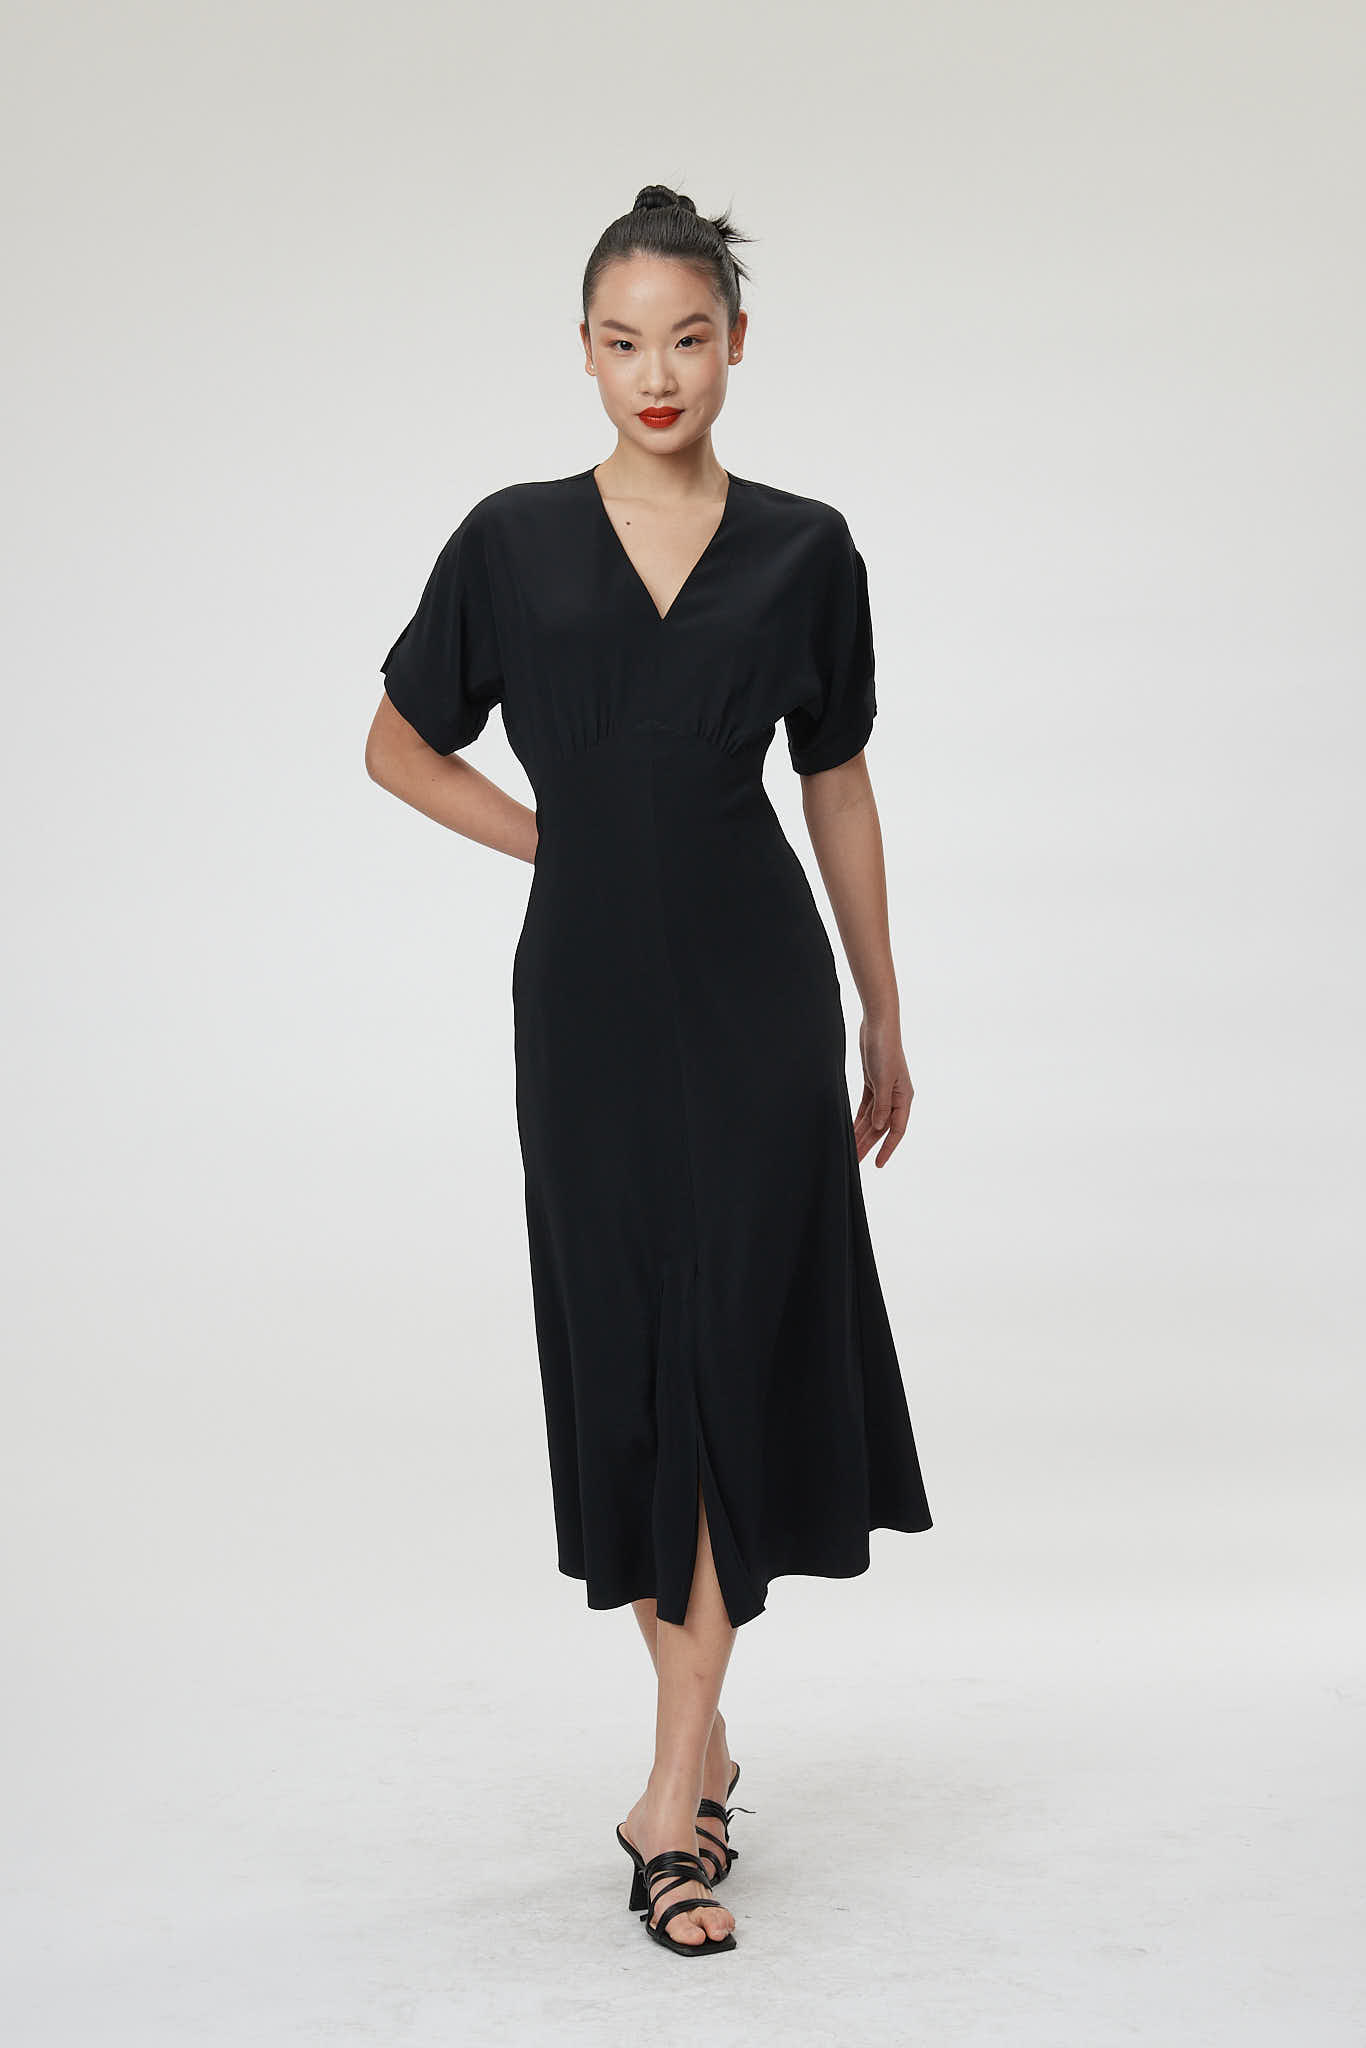 Bologna Dress – A-line day-to-night dress in black0